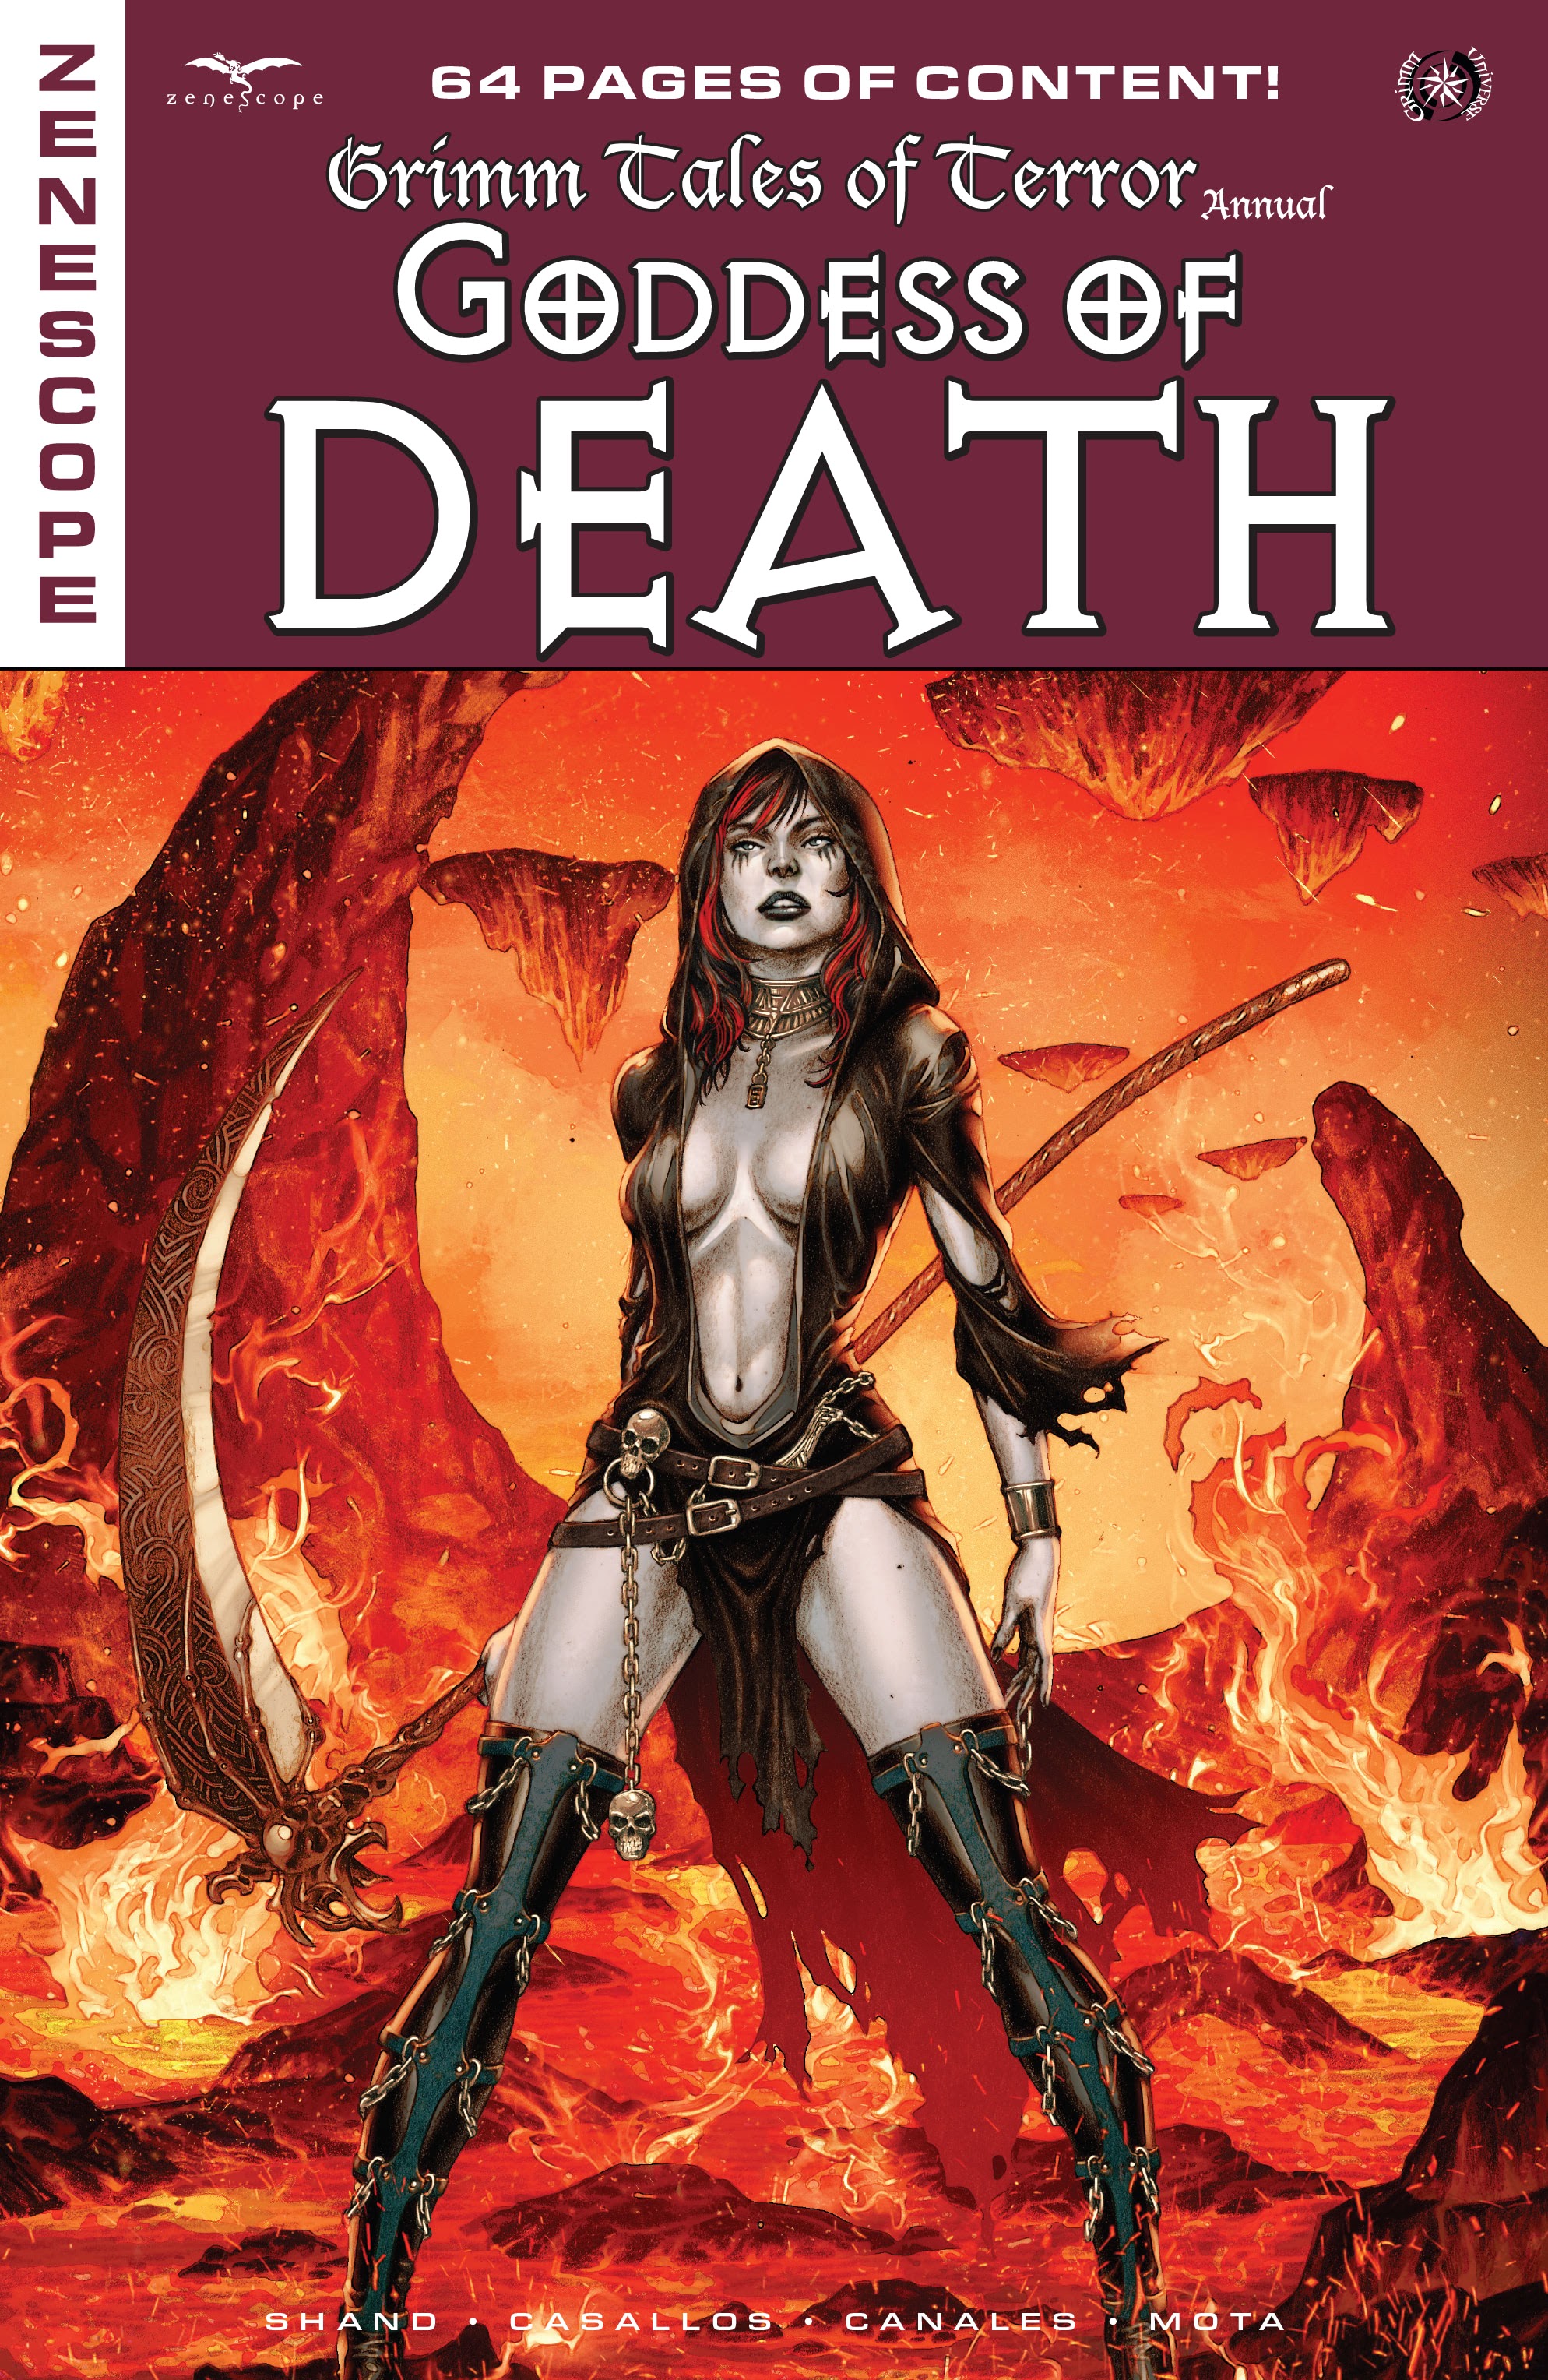 Read online Tales of Terror Annual: Goddess of Death comic -  Issue # Full - 1